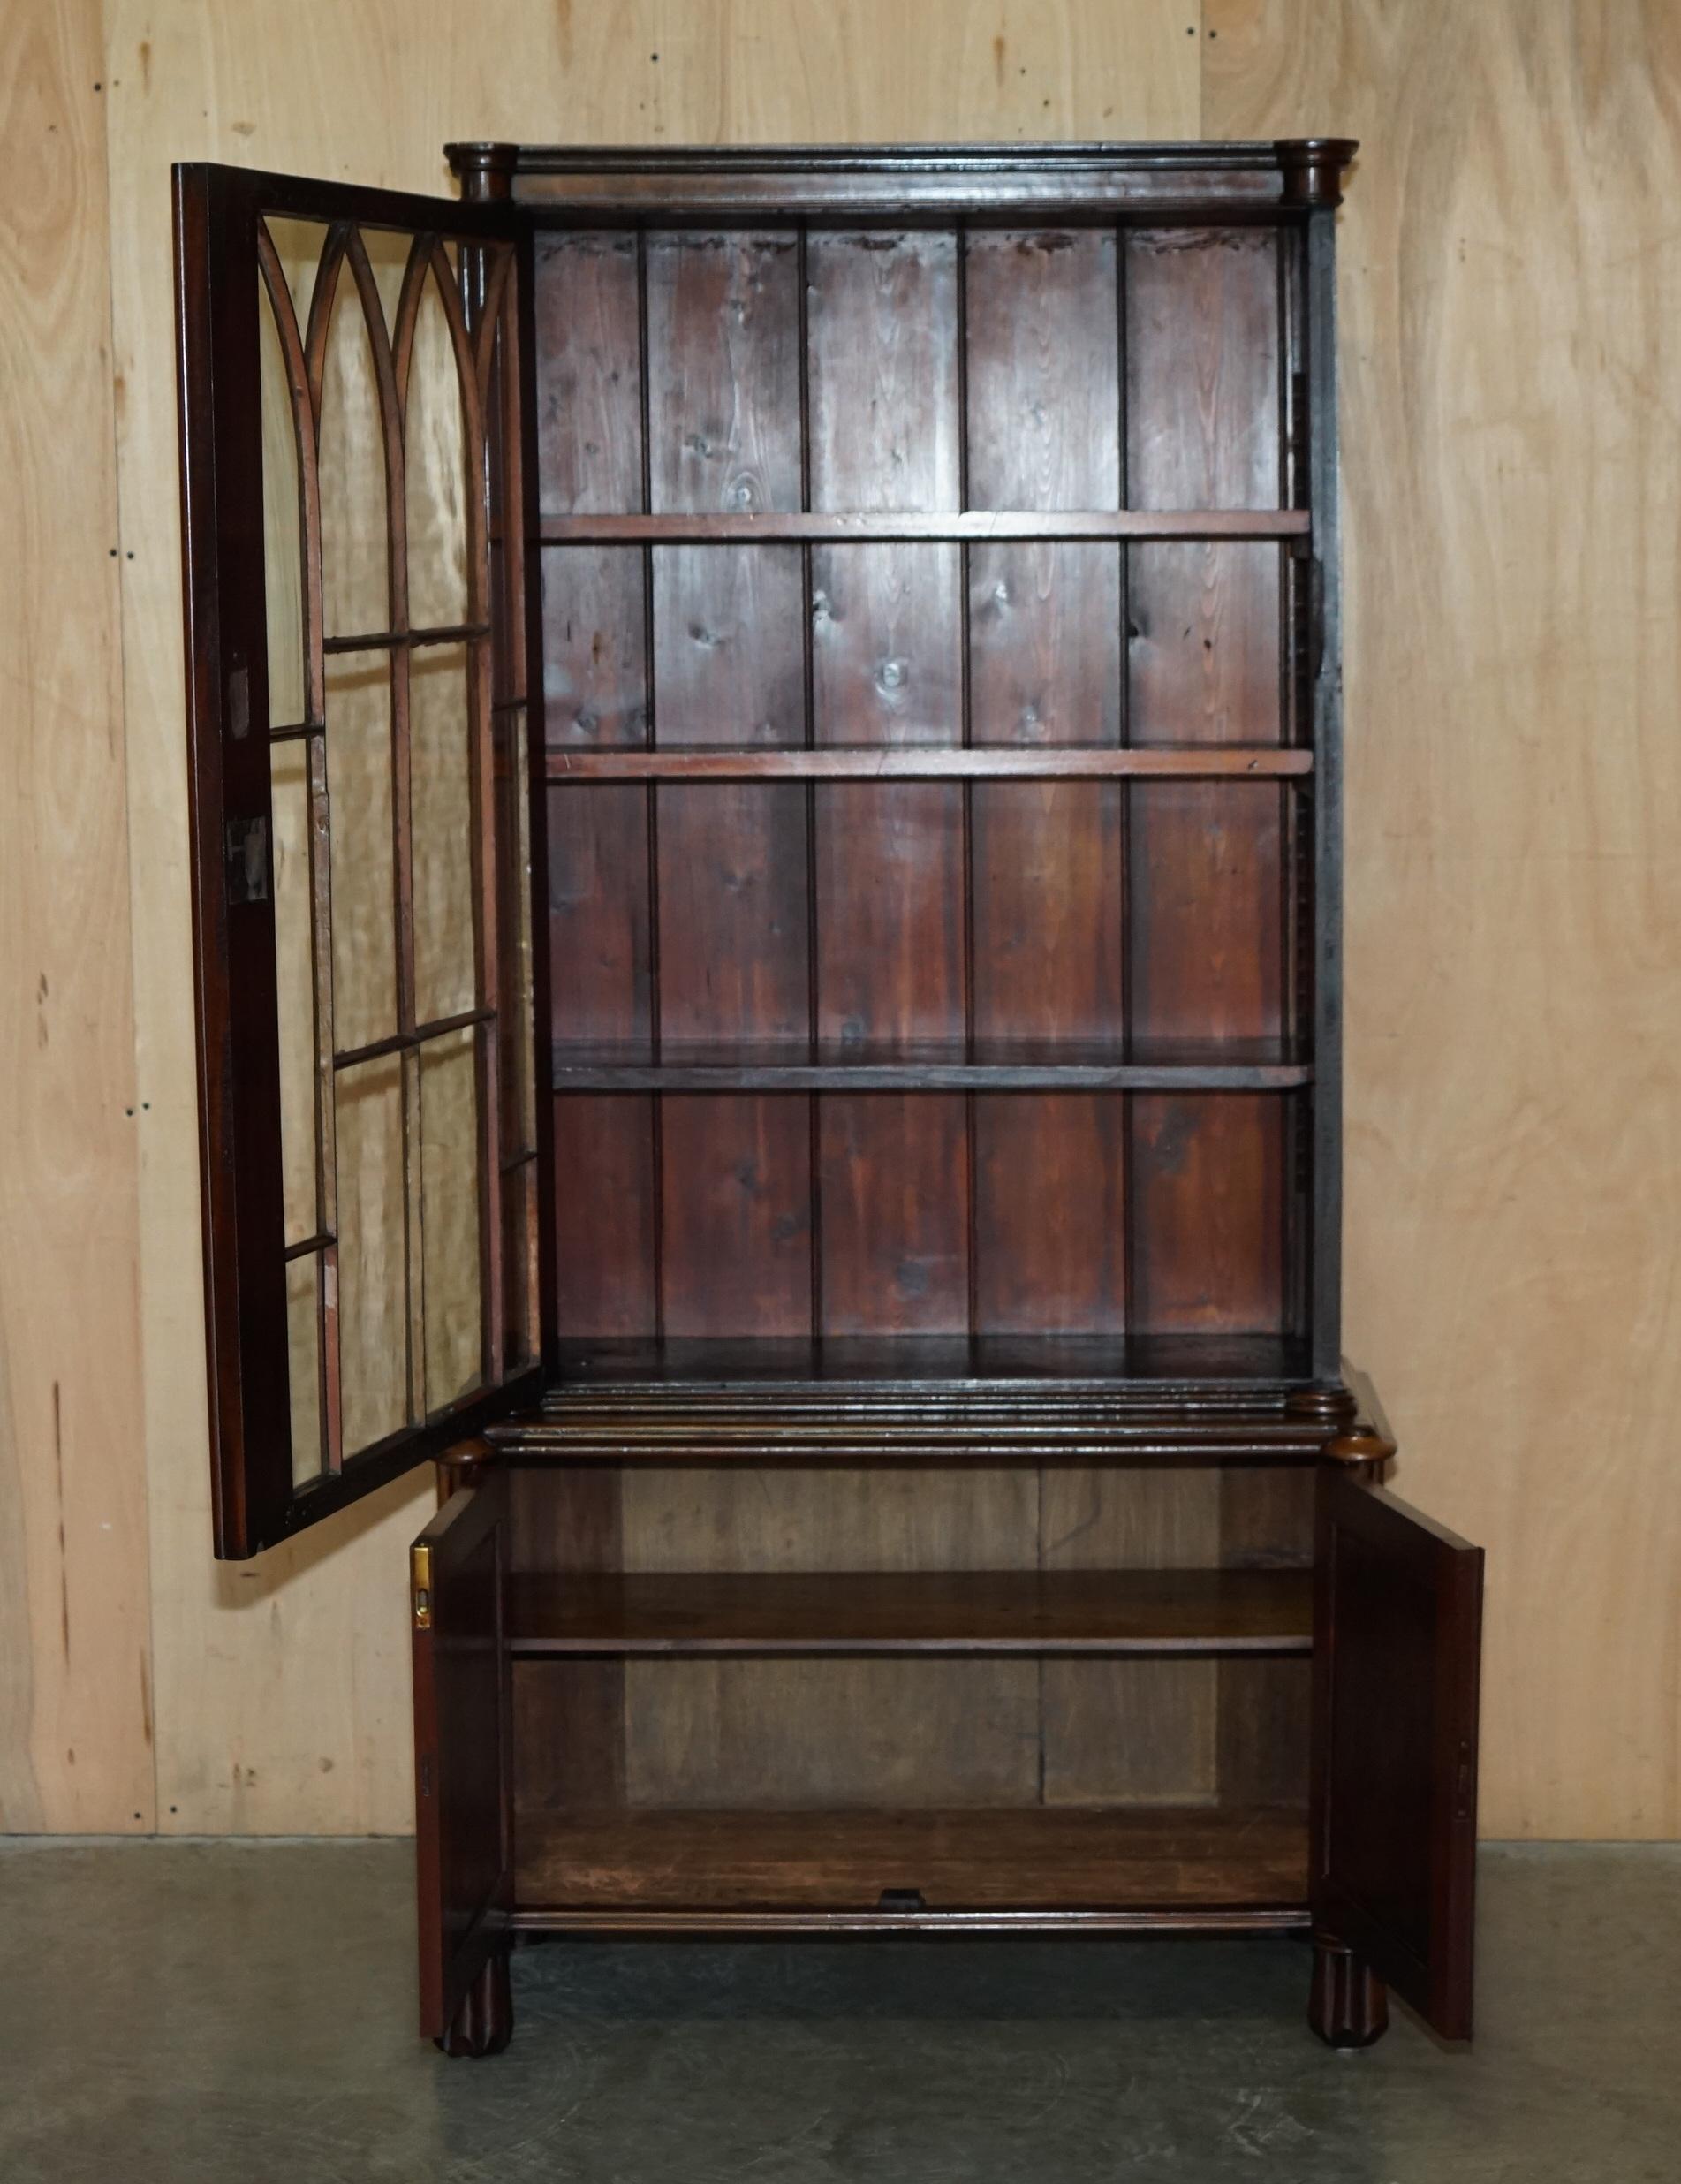 EARLY VICTORIAN GOTHiC REVIVAL ASTRAL GLAZED LIBRARY BOOKCASE MIT STEEPLE GLASS im Angebot 6